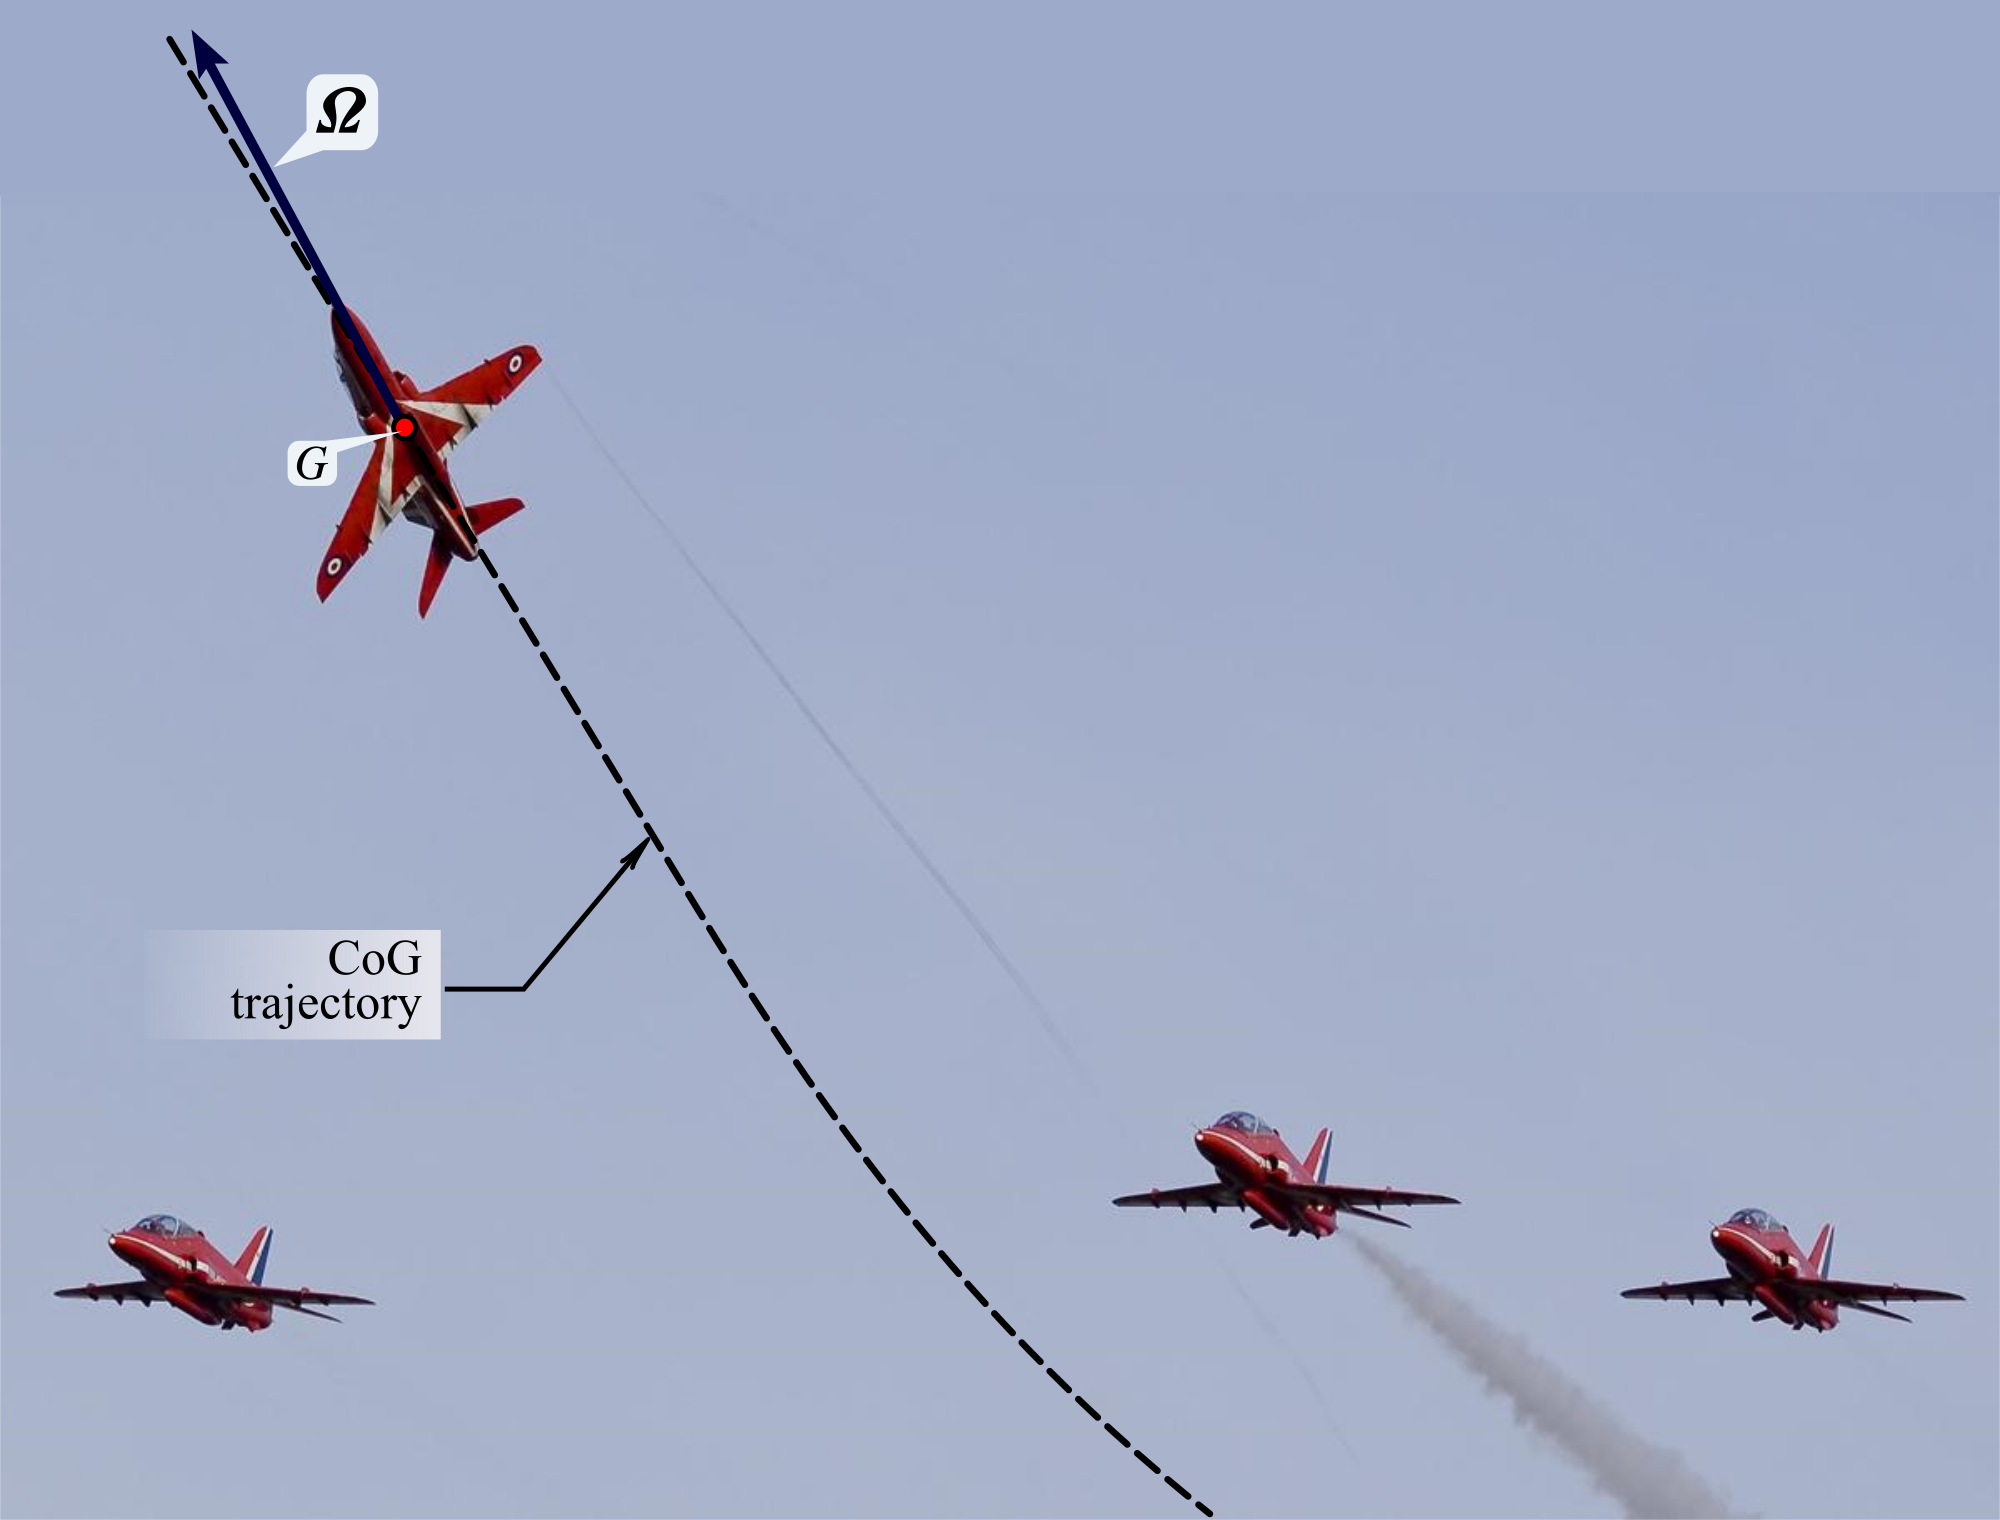 Aircraft CoG trajectory in a roll maneuver.